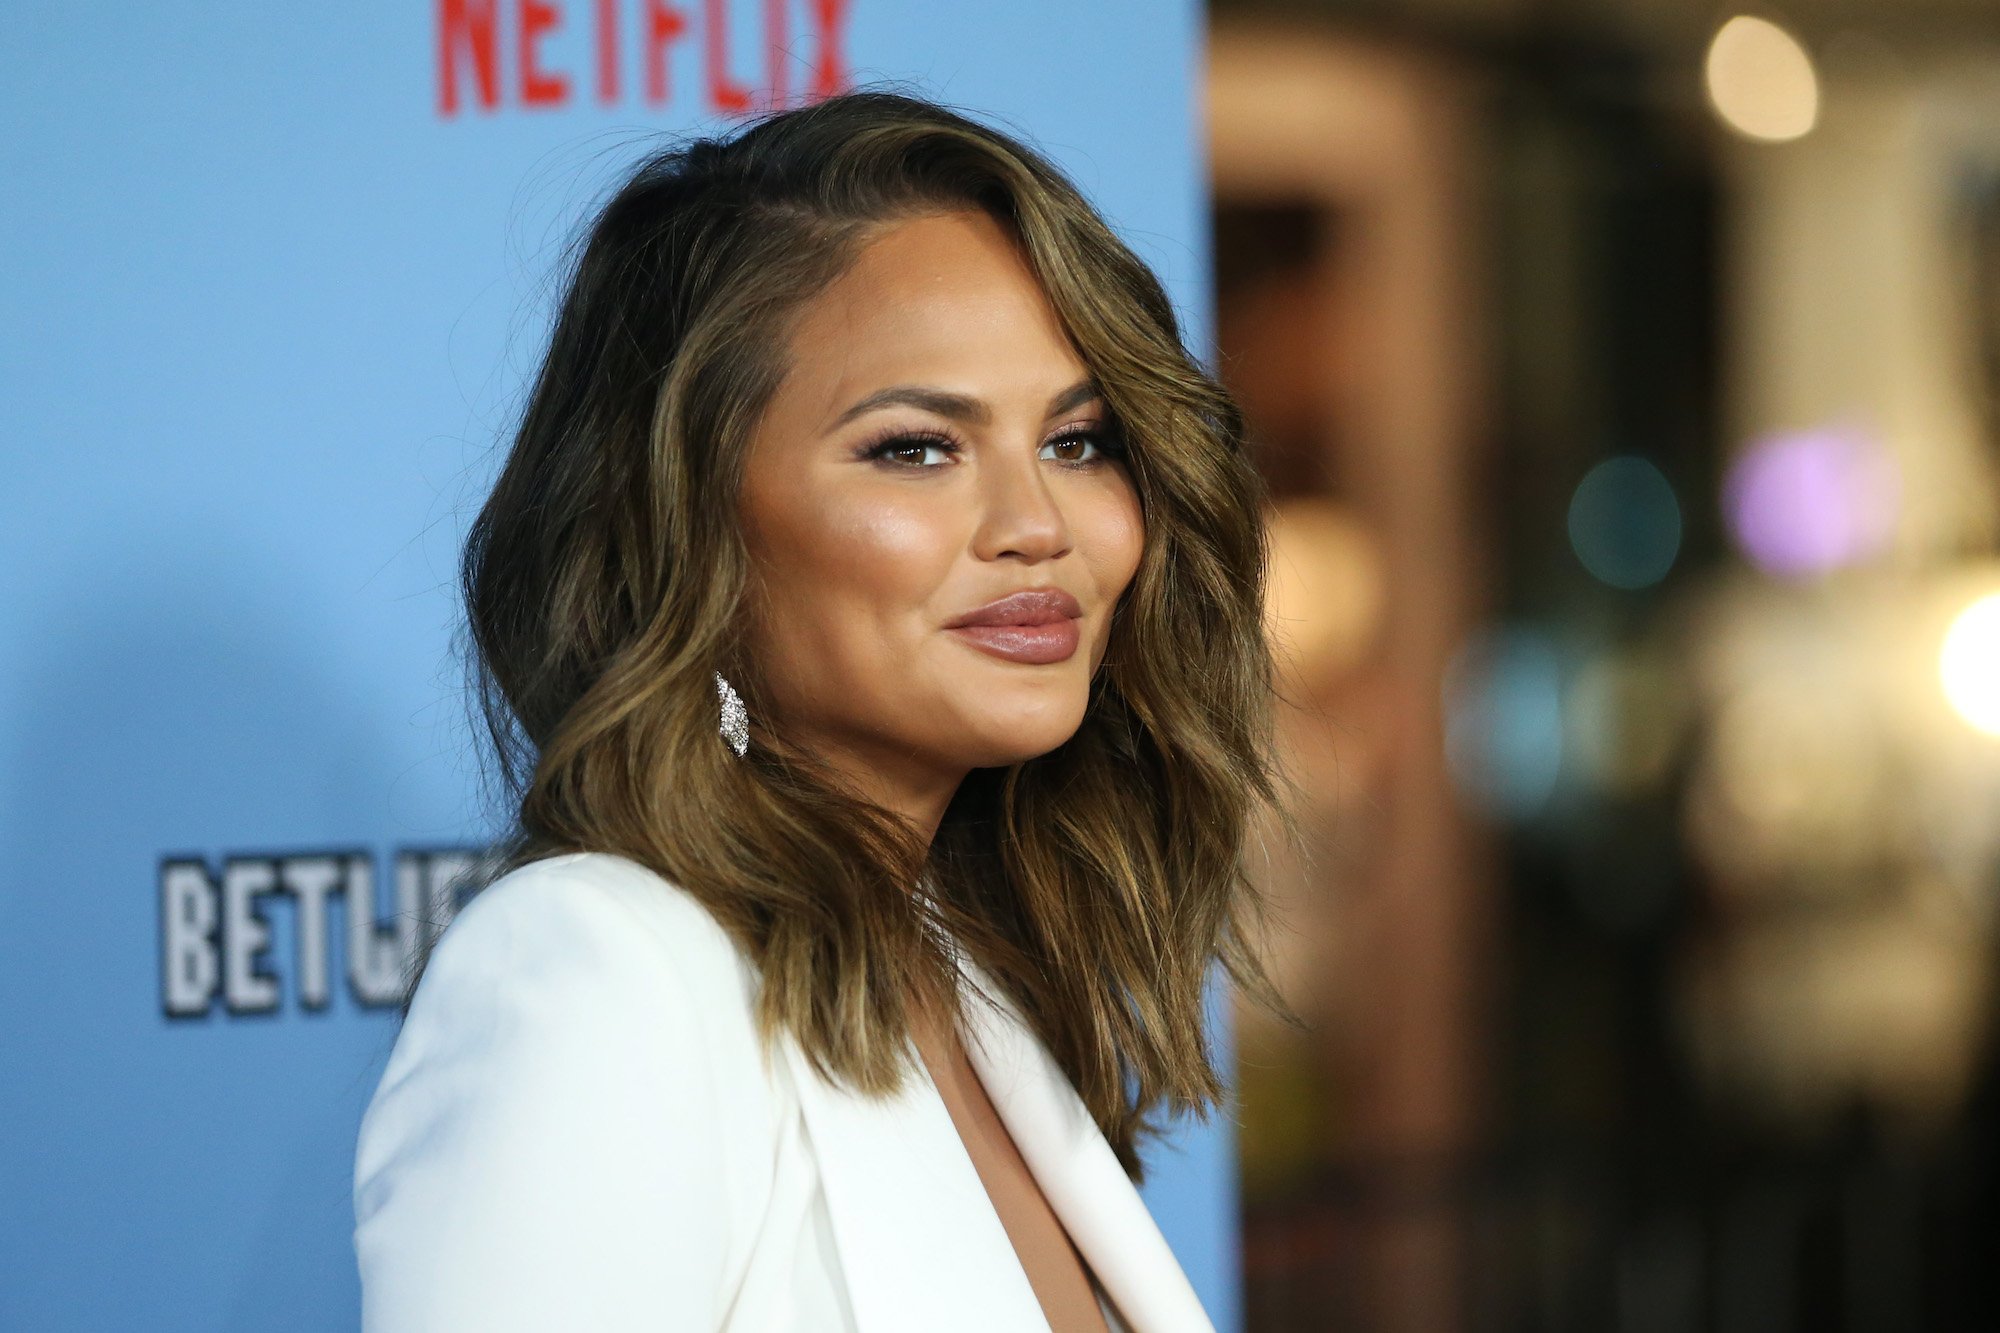 Chrissy Teigen smiling in front of a blurred background